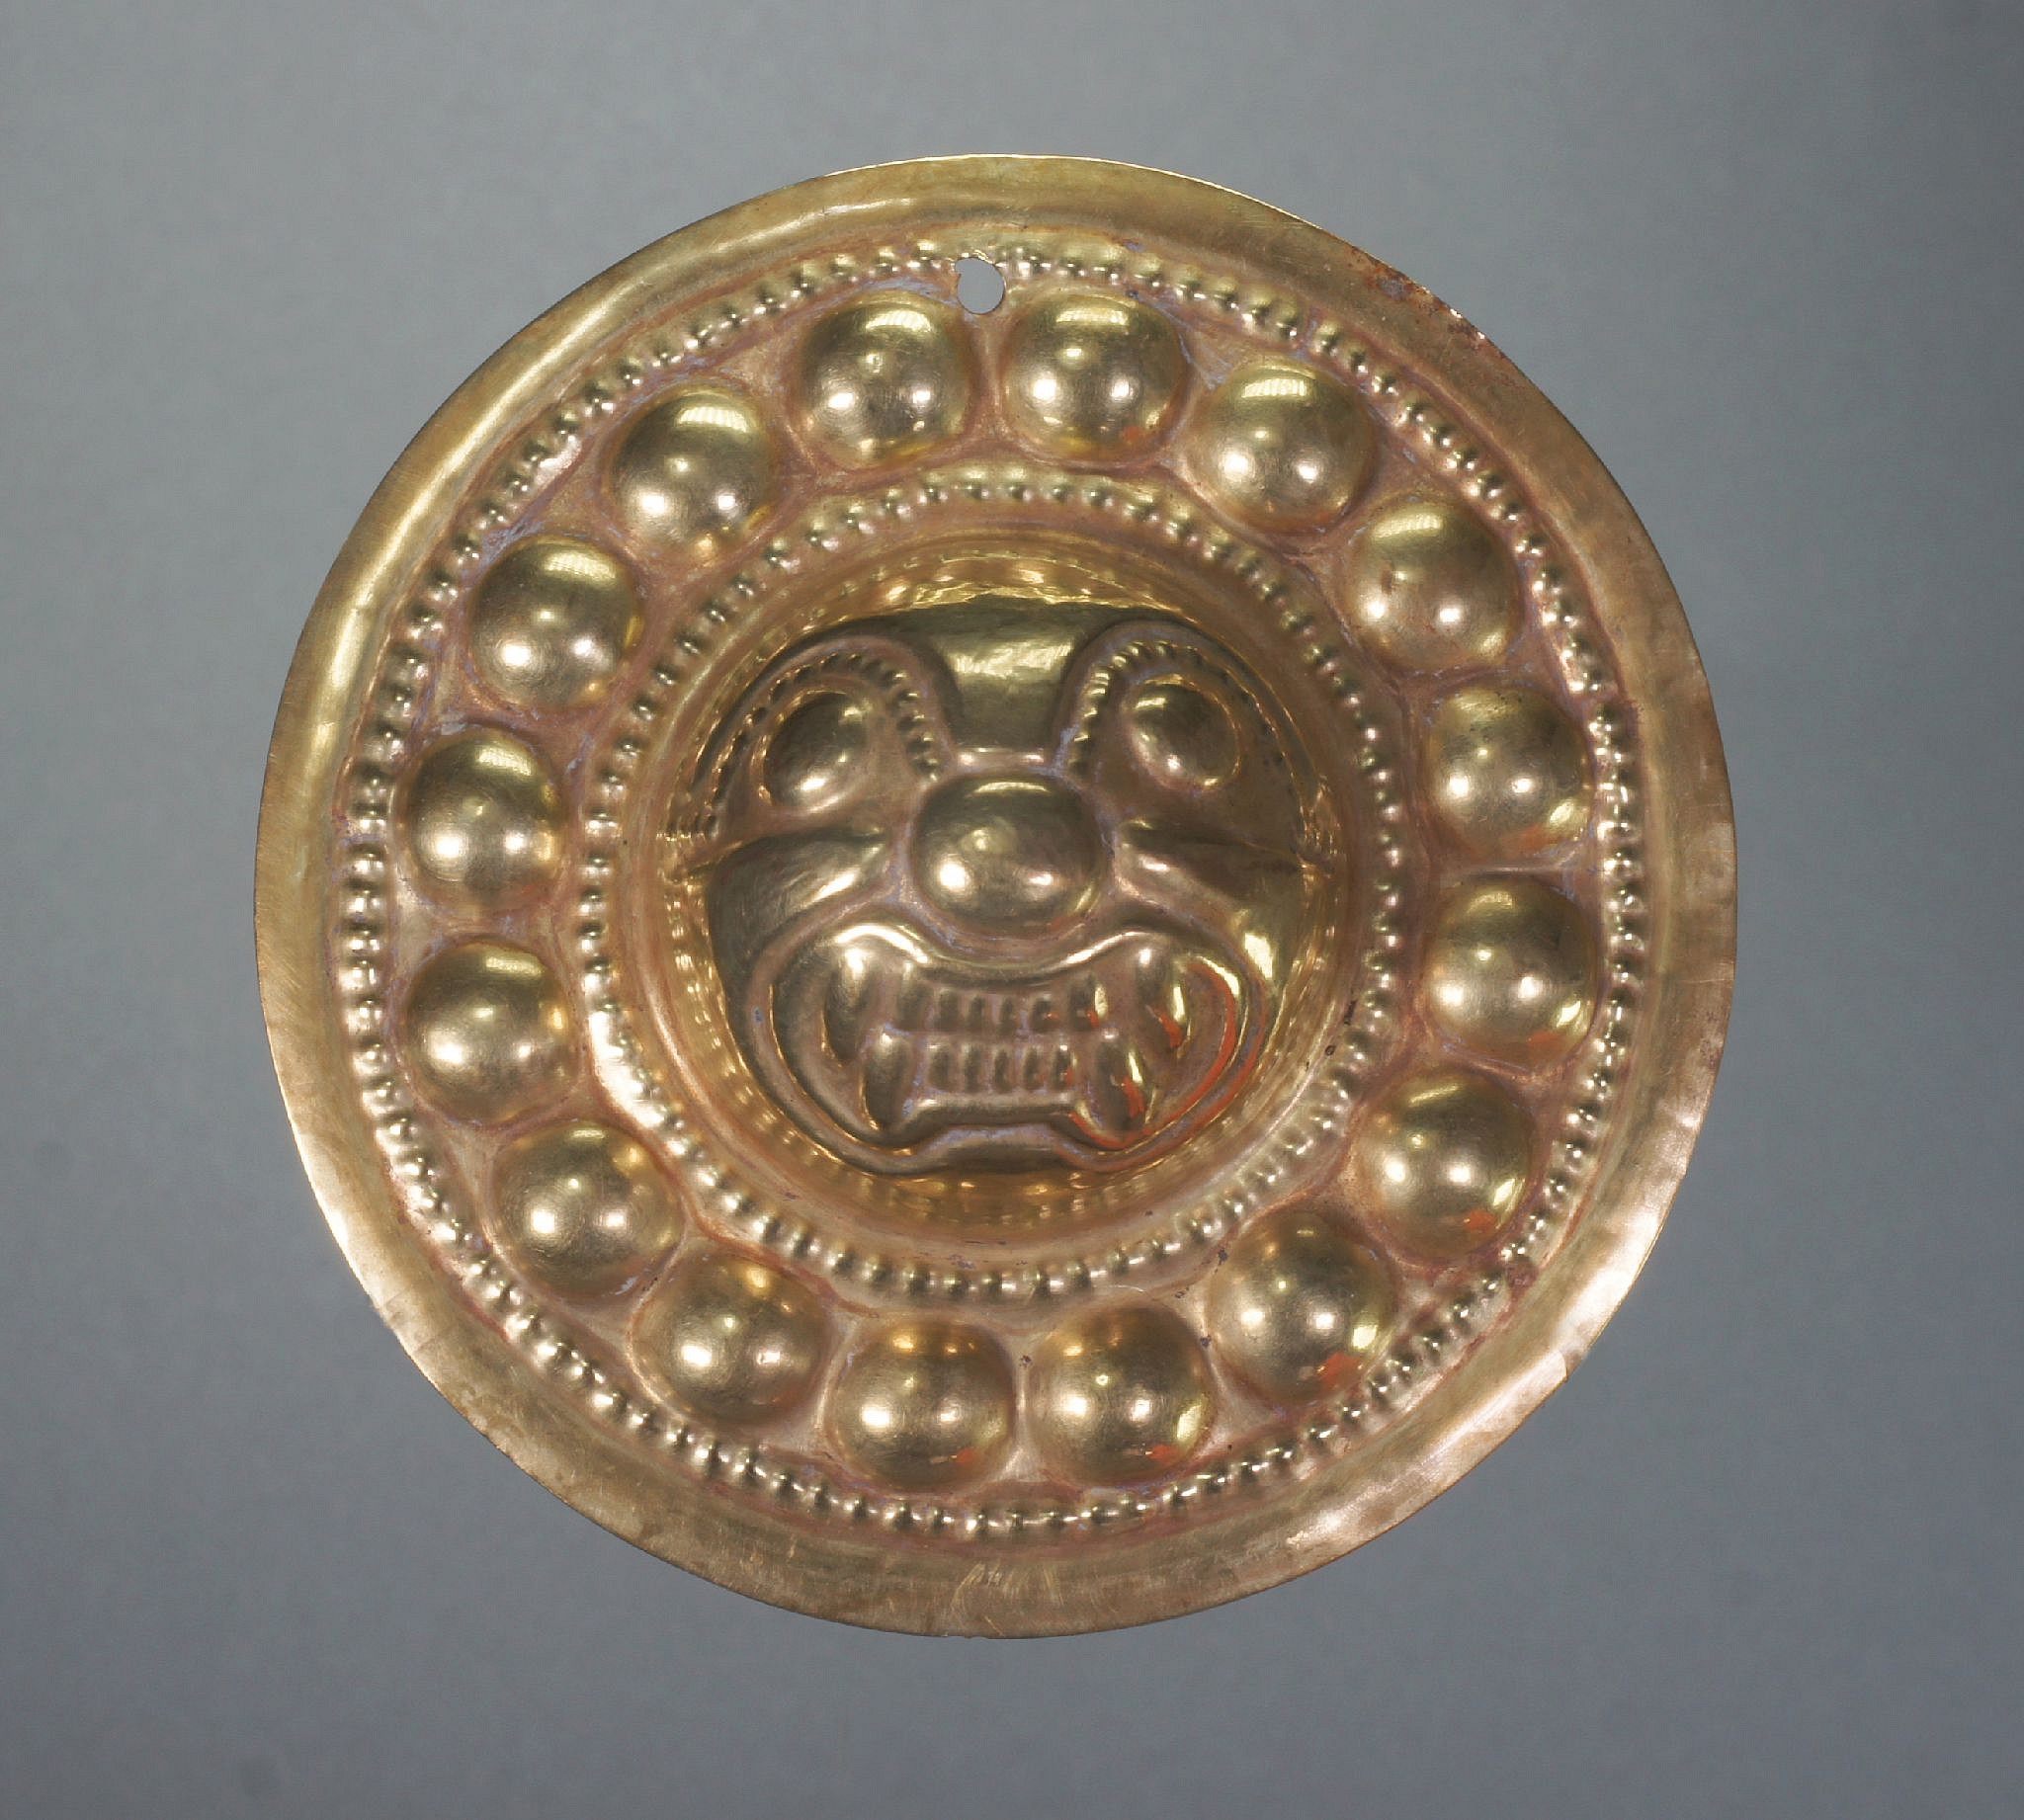 Ecuador, Narino Gold Embossed Ornament Decorated with a Feline Head
These ornaments have a suspension on the rim and were either ear ornaments or pendants.  The designs vary, from concentric circles to heads in high relief, ranging from human to animal faces.  The feline face is the largest of the head types.  Similar examples are illustrated in El Dorado by Warwick Bray, p.213.  Ex. New York collector, prior to 1970.
Media: Metal
Dimensions: Diameter: 3.9"   Weight: 26.7gramsGold alloy:  Gold 73.4%, Silver 17.9%, Copper 8.3% and Sn. Tin .01%
&bull;SOLD
N7060